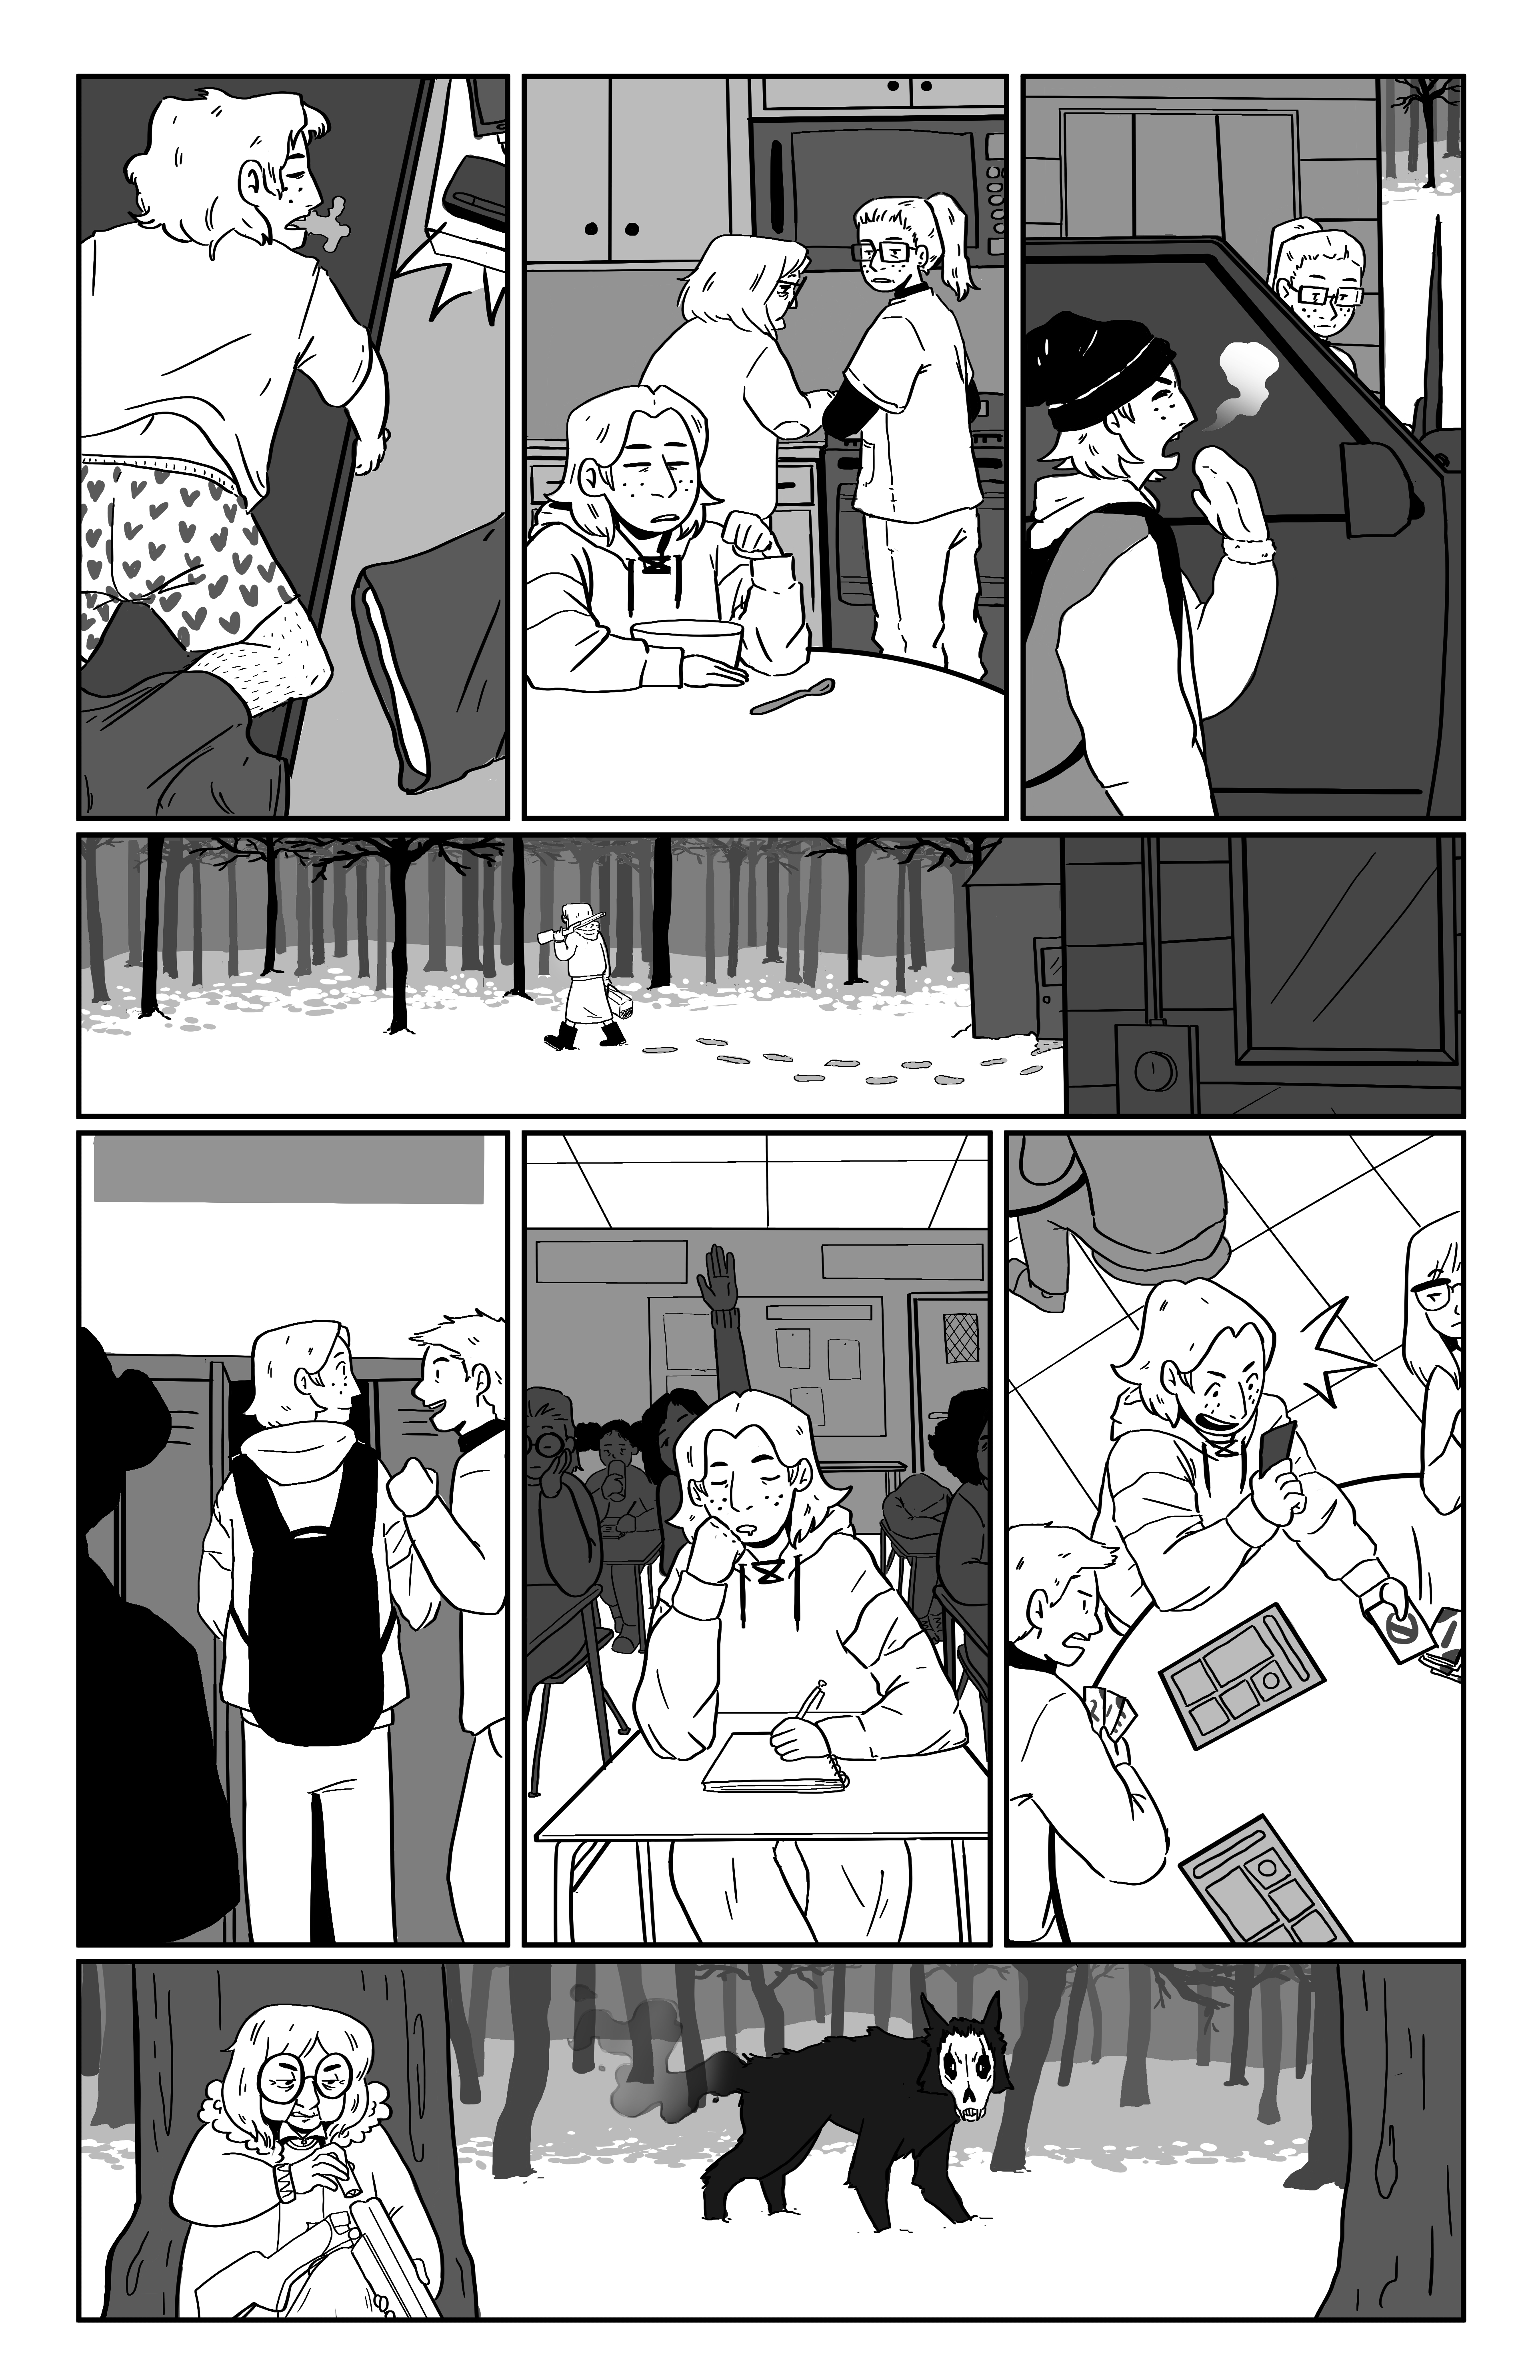 3 of 4 comic pages by Molly Jurewicz